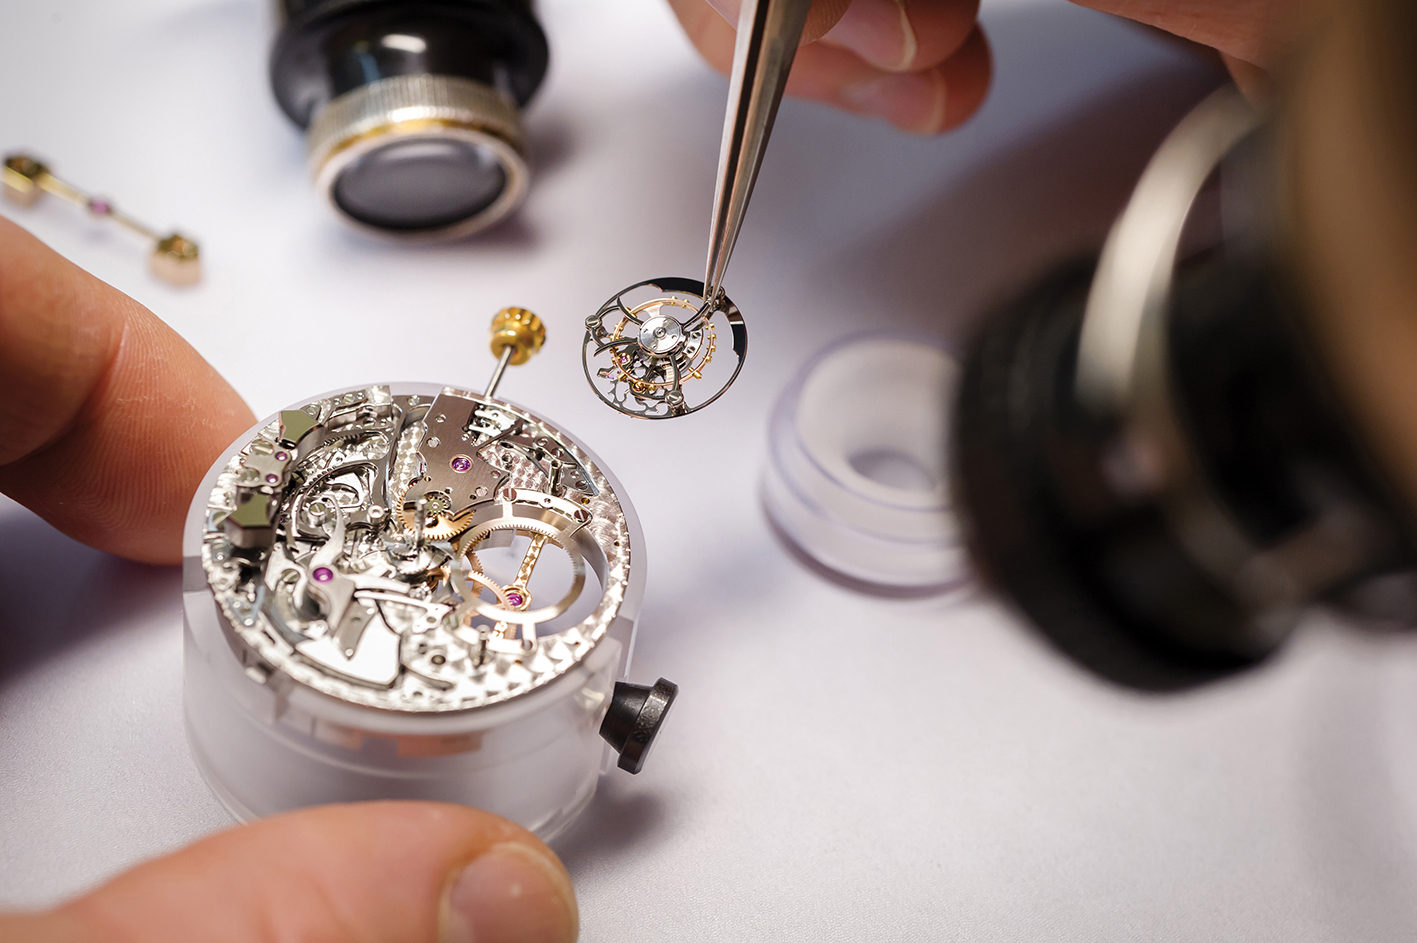 Introducing the Girard-Perregaux Minute Repeater Tourbillon with Gold ...